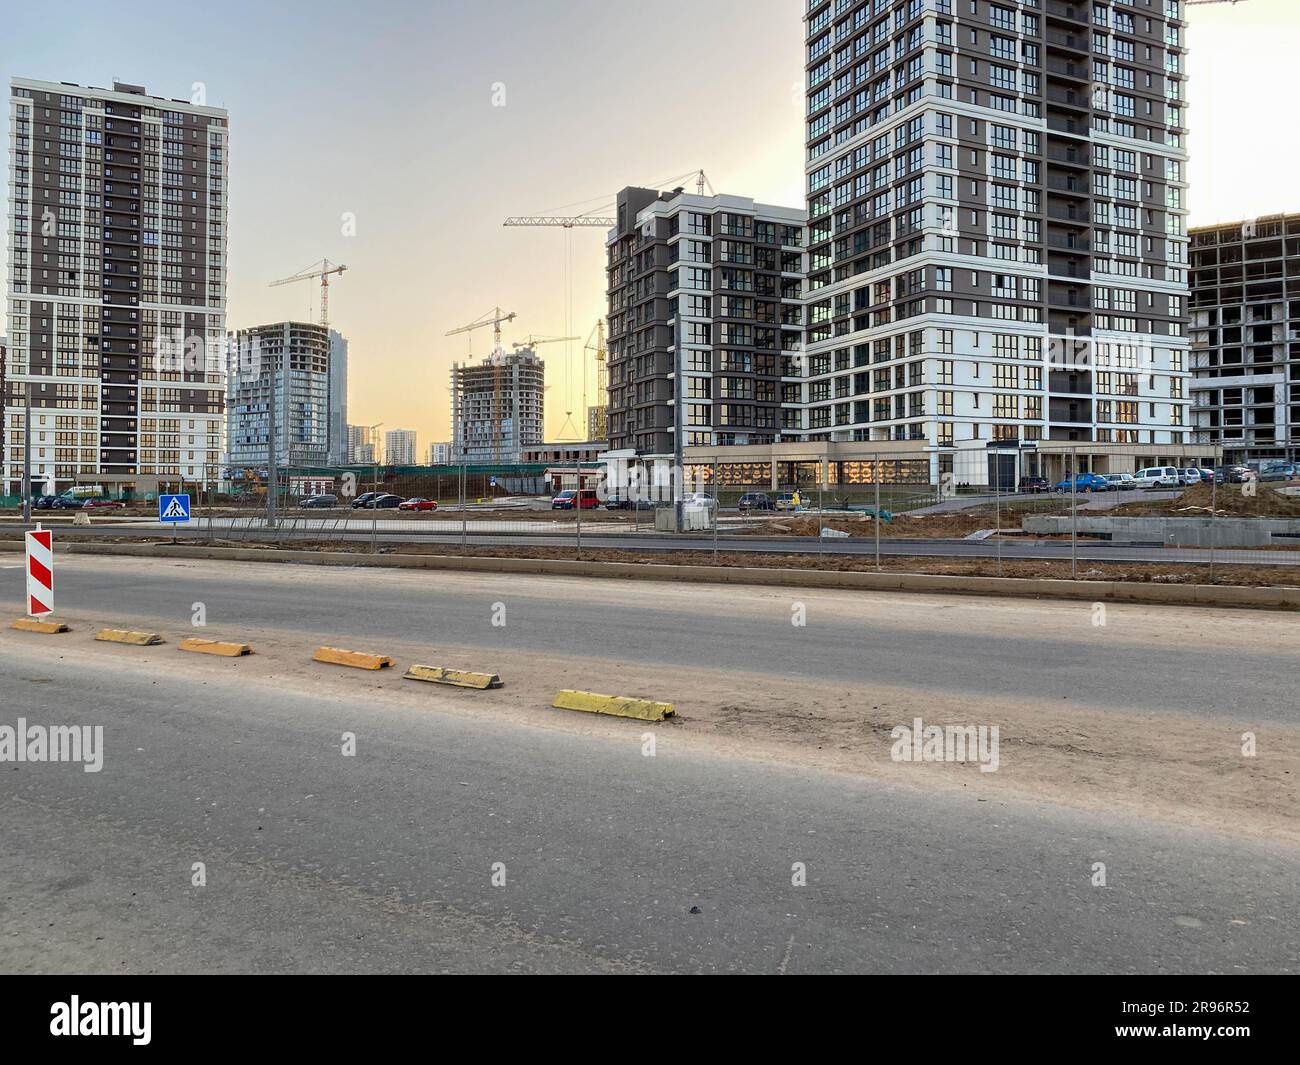 New large beautiful modern microdistrict with high buildings in new buildings in the city of the megalopolis. Stock Photo